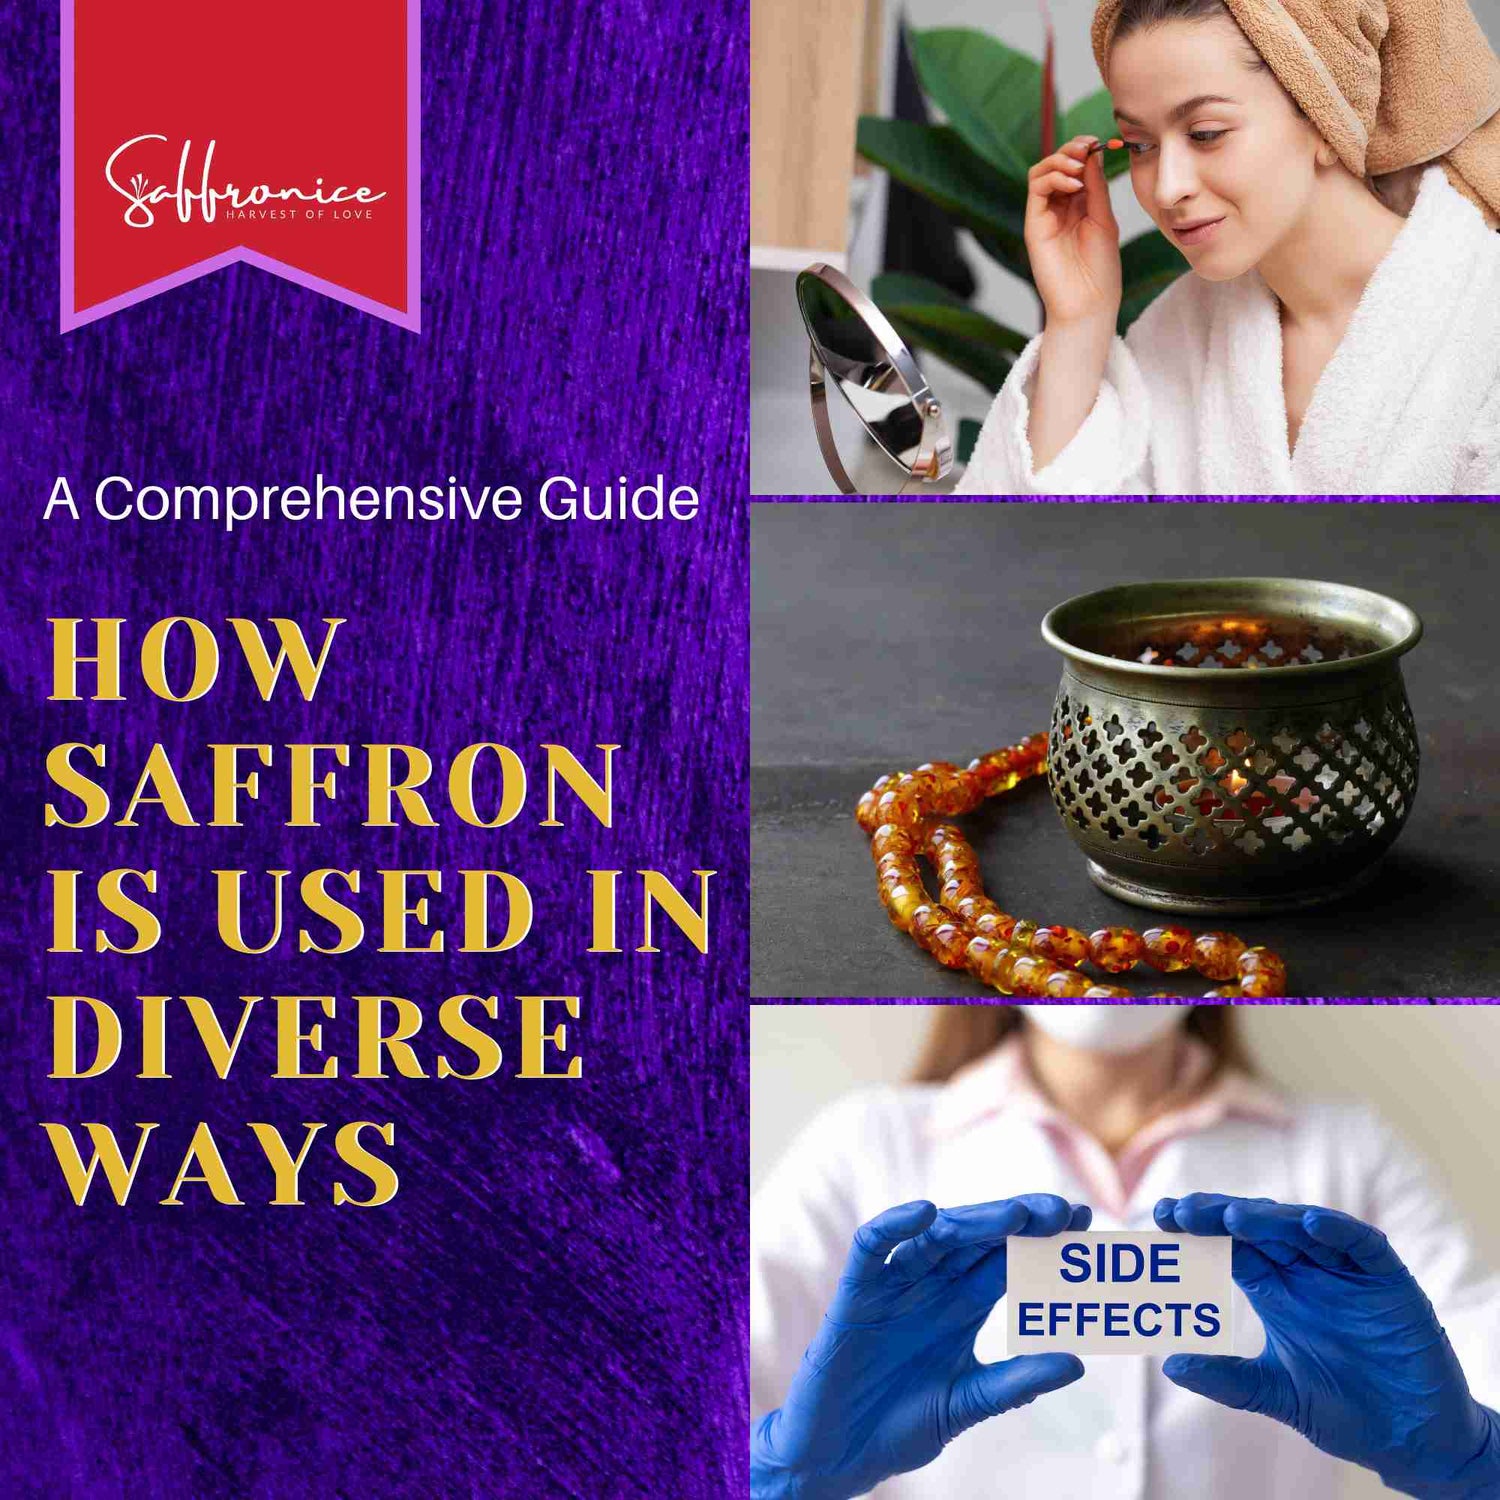 How Saffron is Used in Diverse Ways